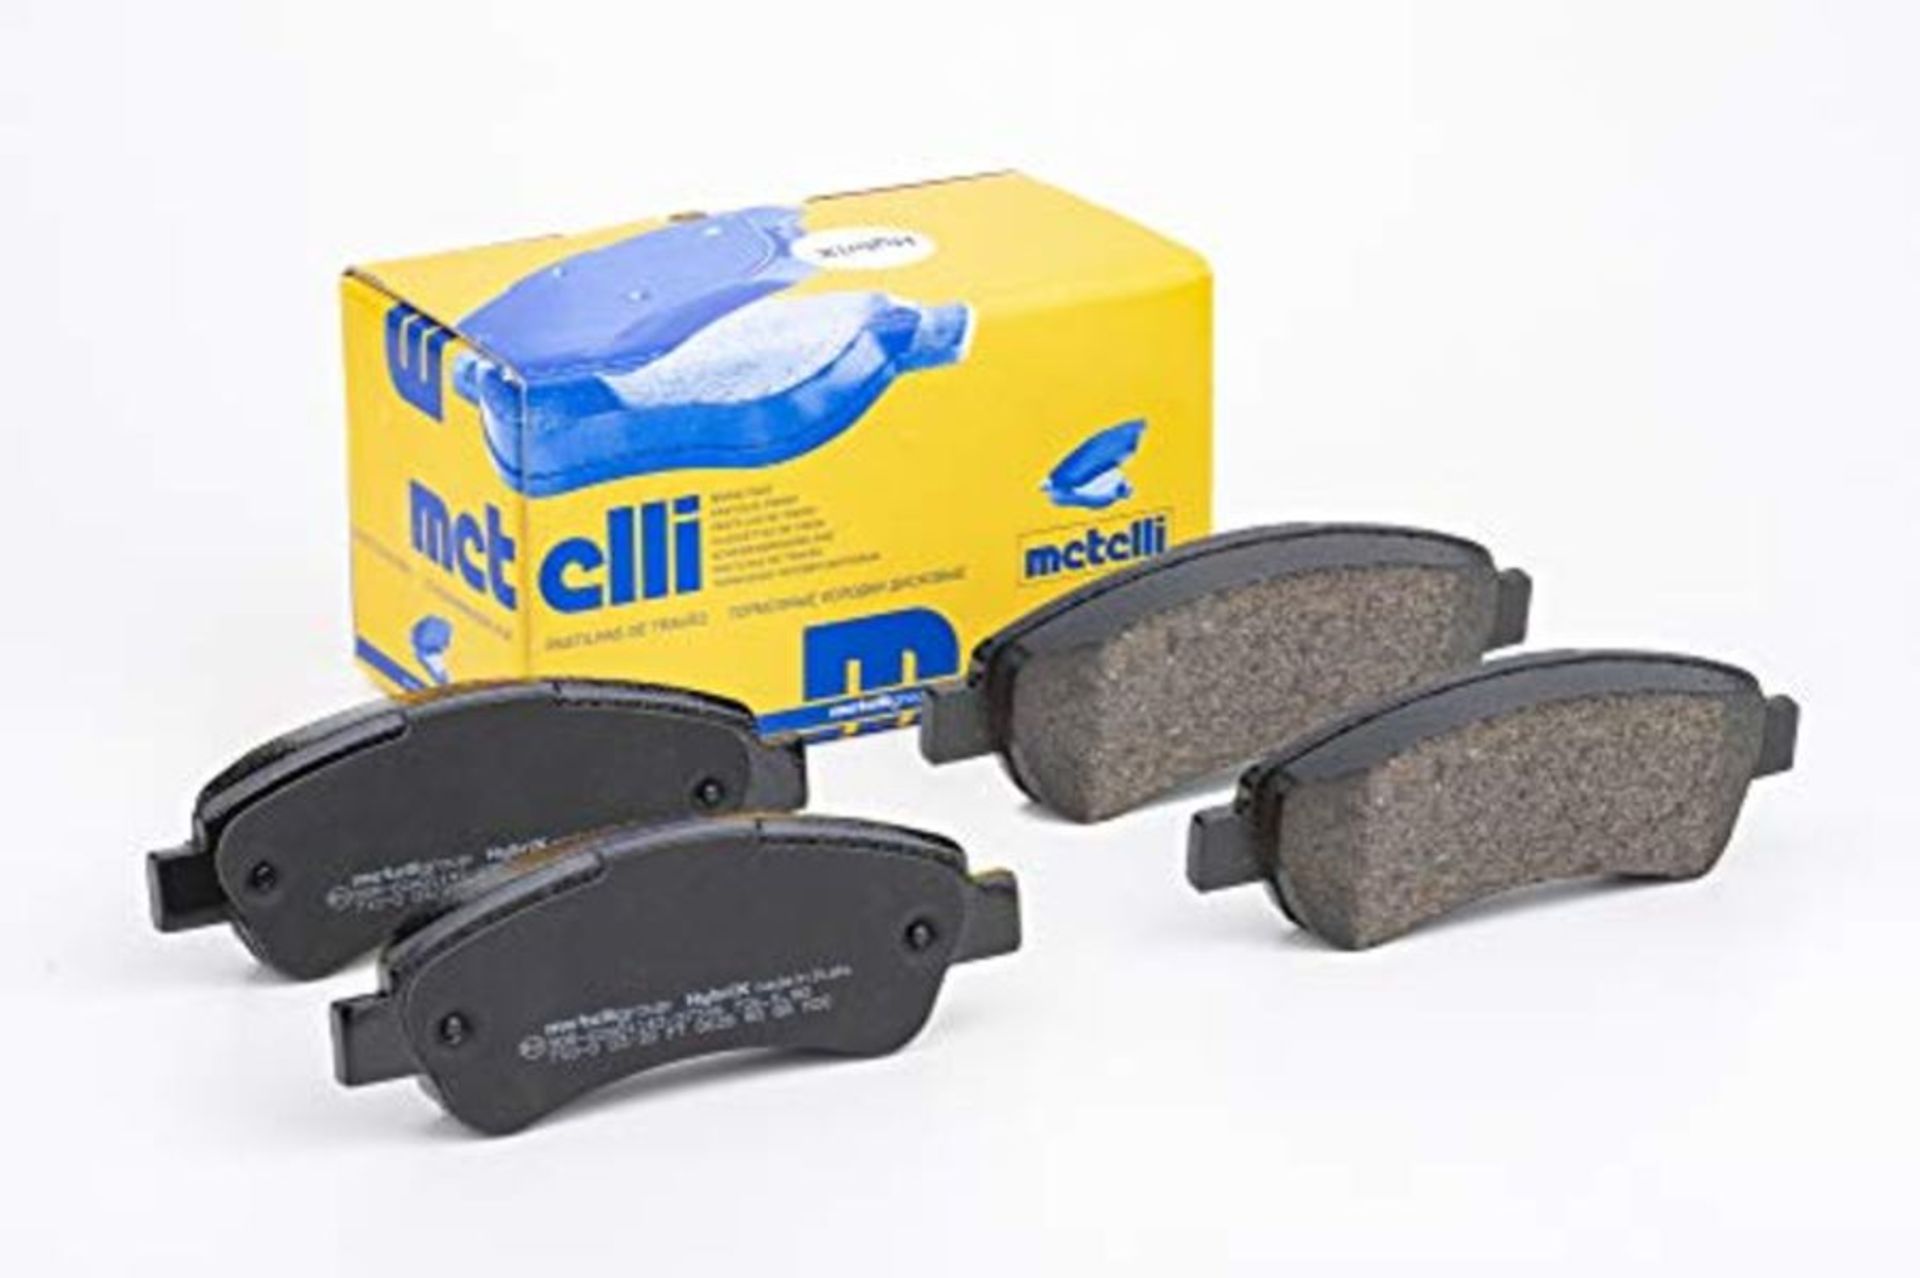 metelligroup 22-0710-0 Brake Pads, Made in Italy, Spare Parts for Cars, ECE R90 Certif